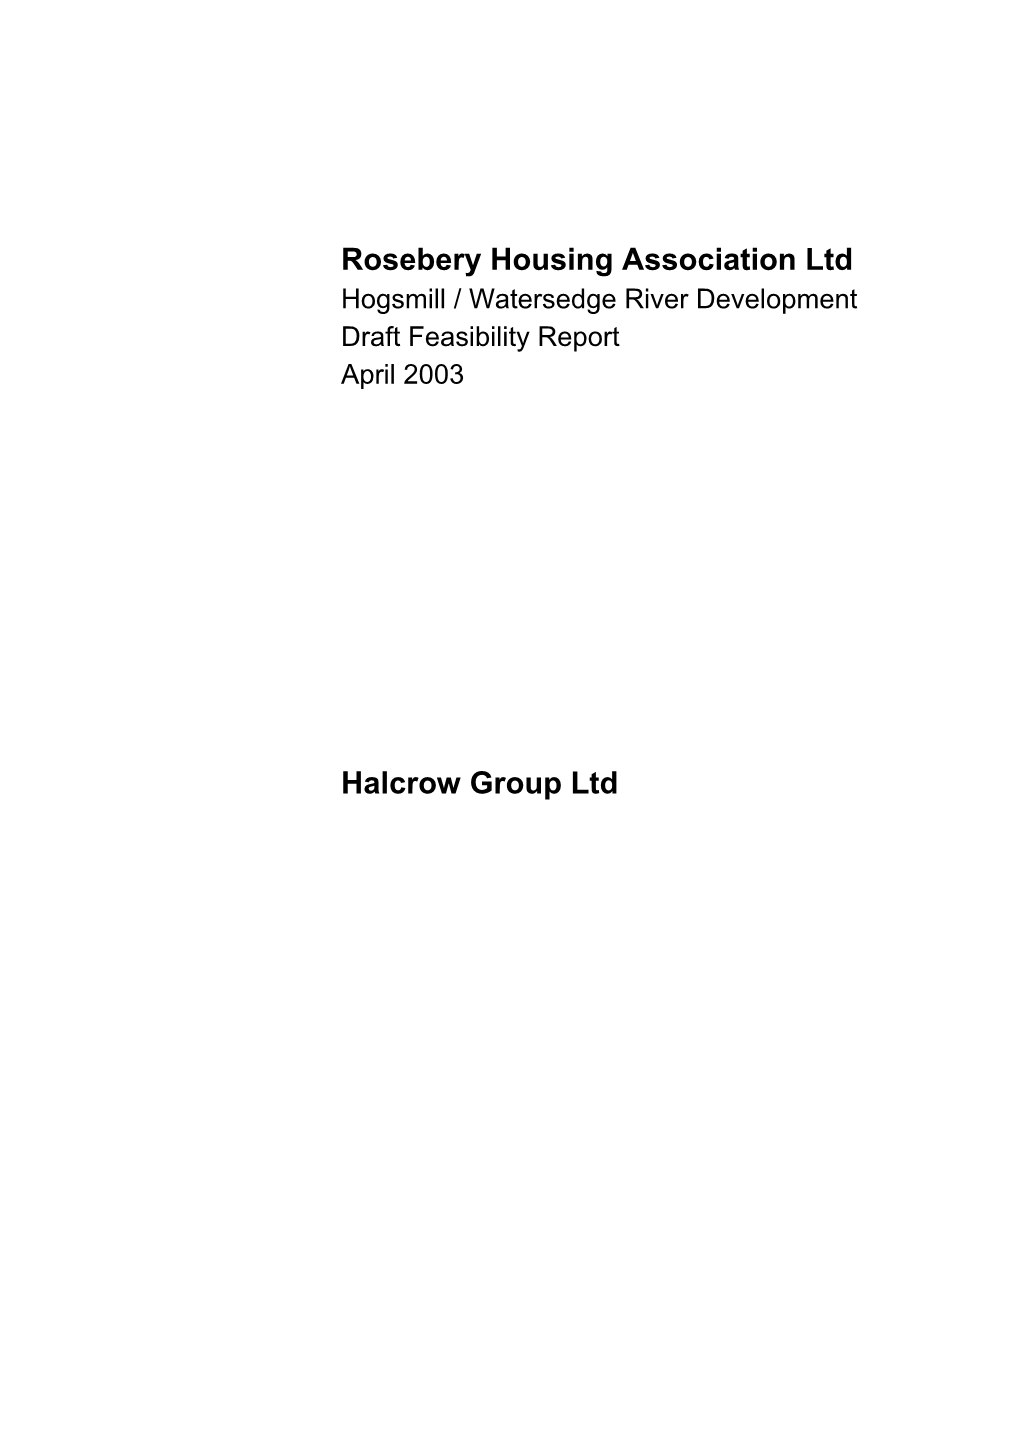 Halcrow Group Limited